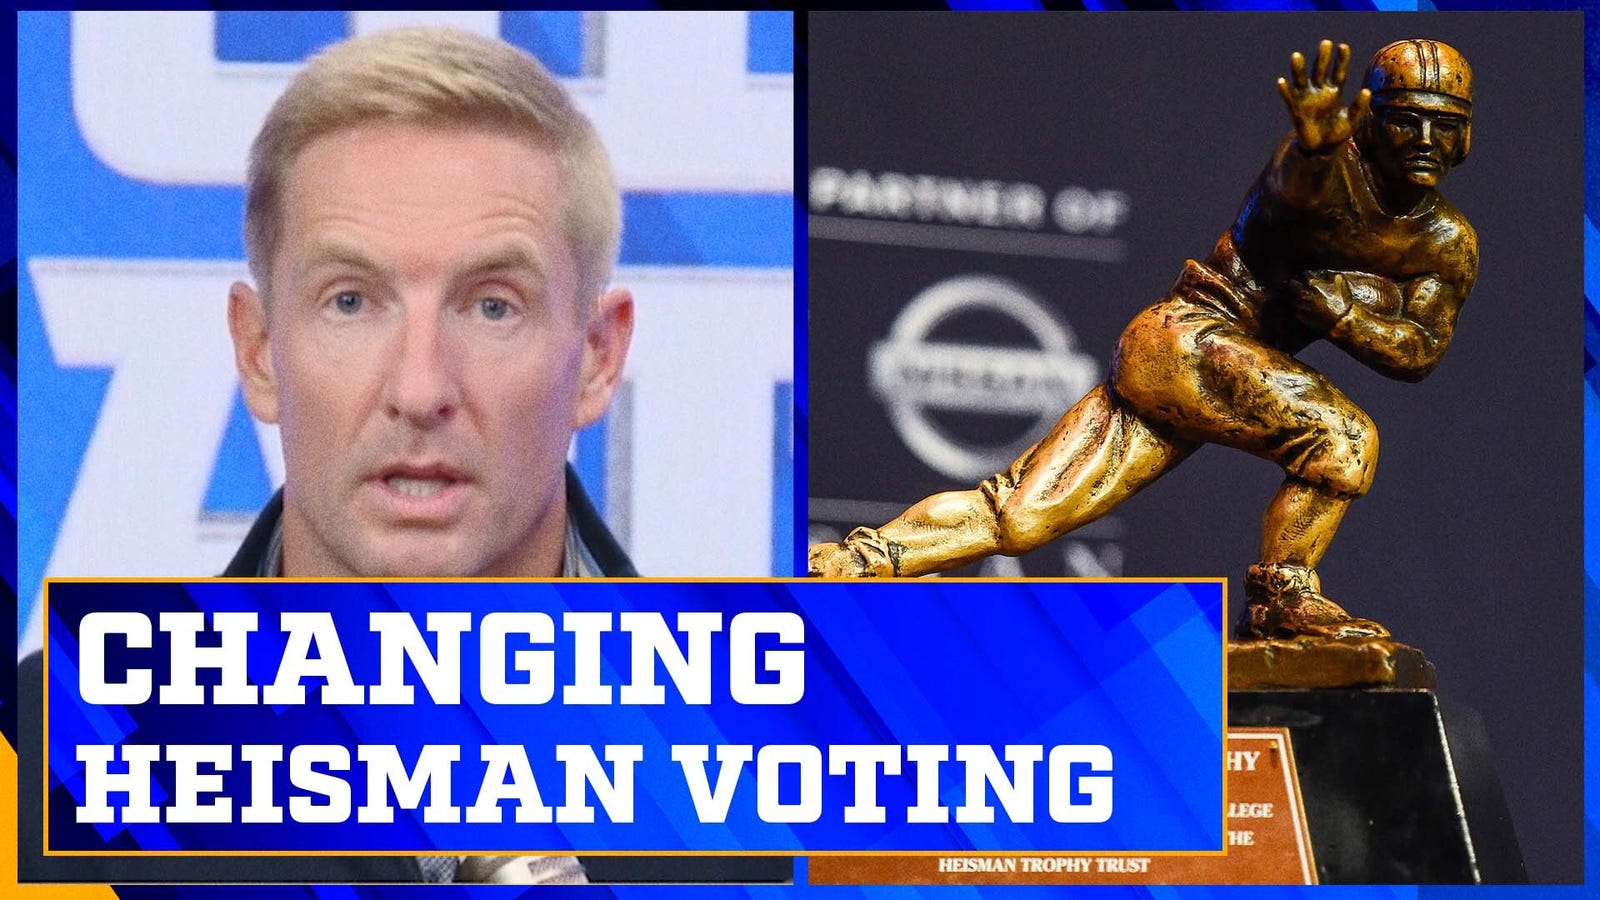 Does the Heisman voting system need to change?